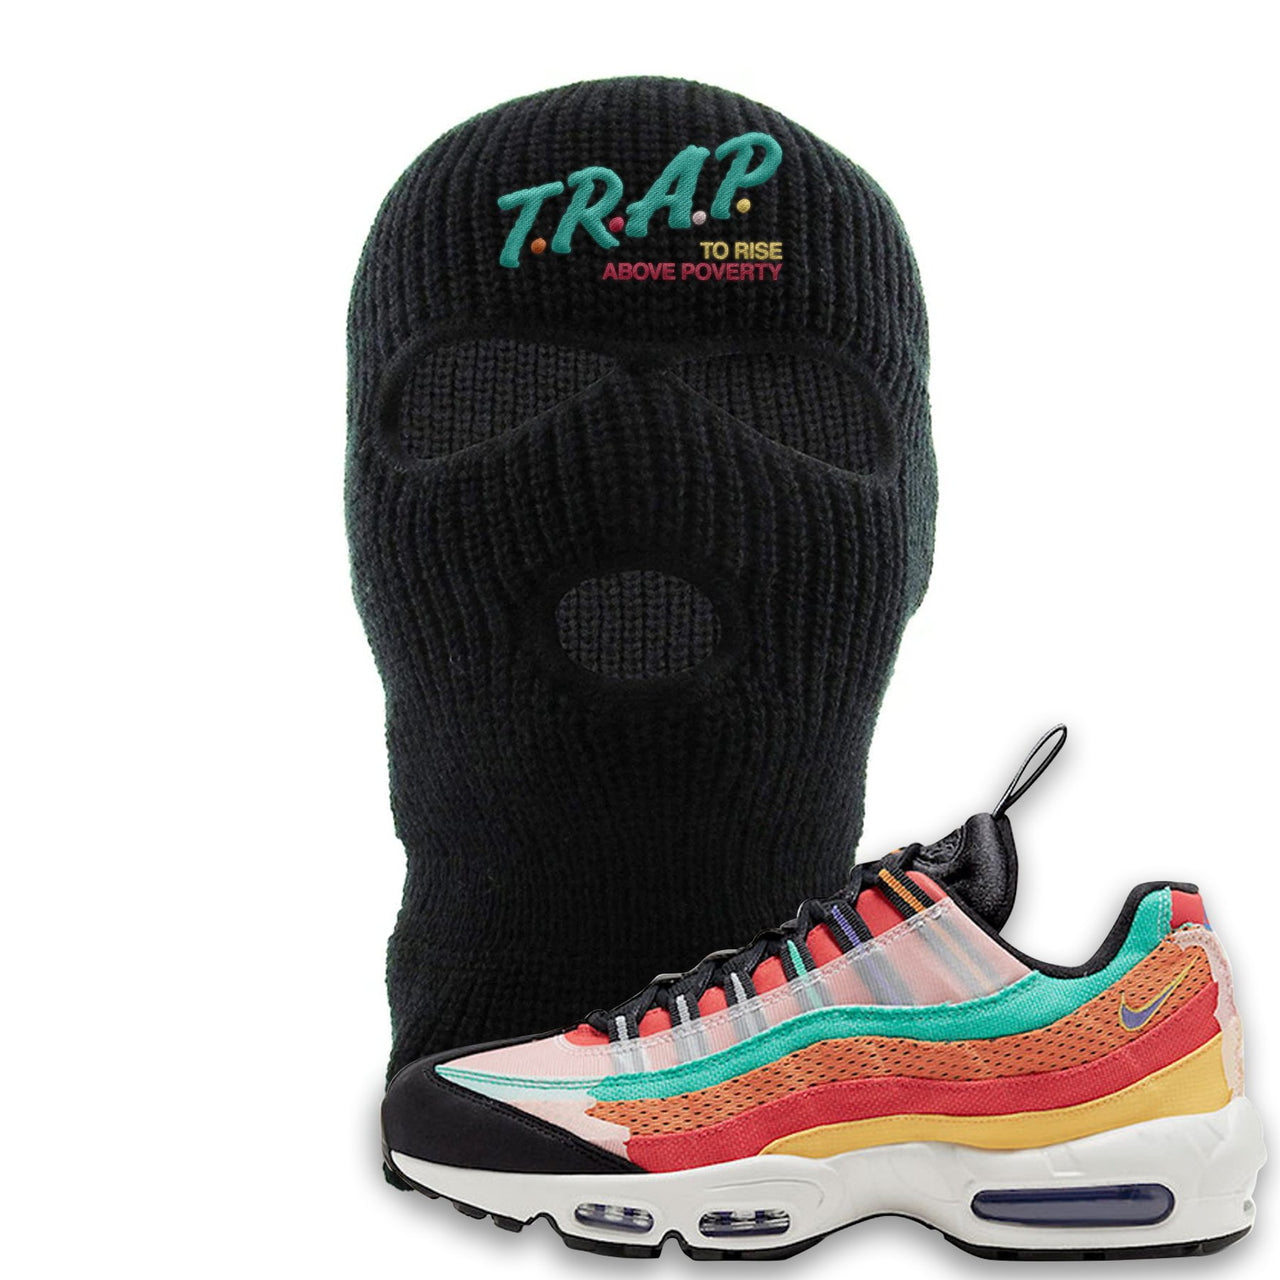 Air Max 95 Black History Month Sneaker Black Ski Mask | Winter Mask to match Nike Air Max 95 Black History Month Shoes | Trap To Rise Above Poverty